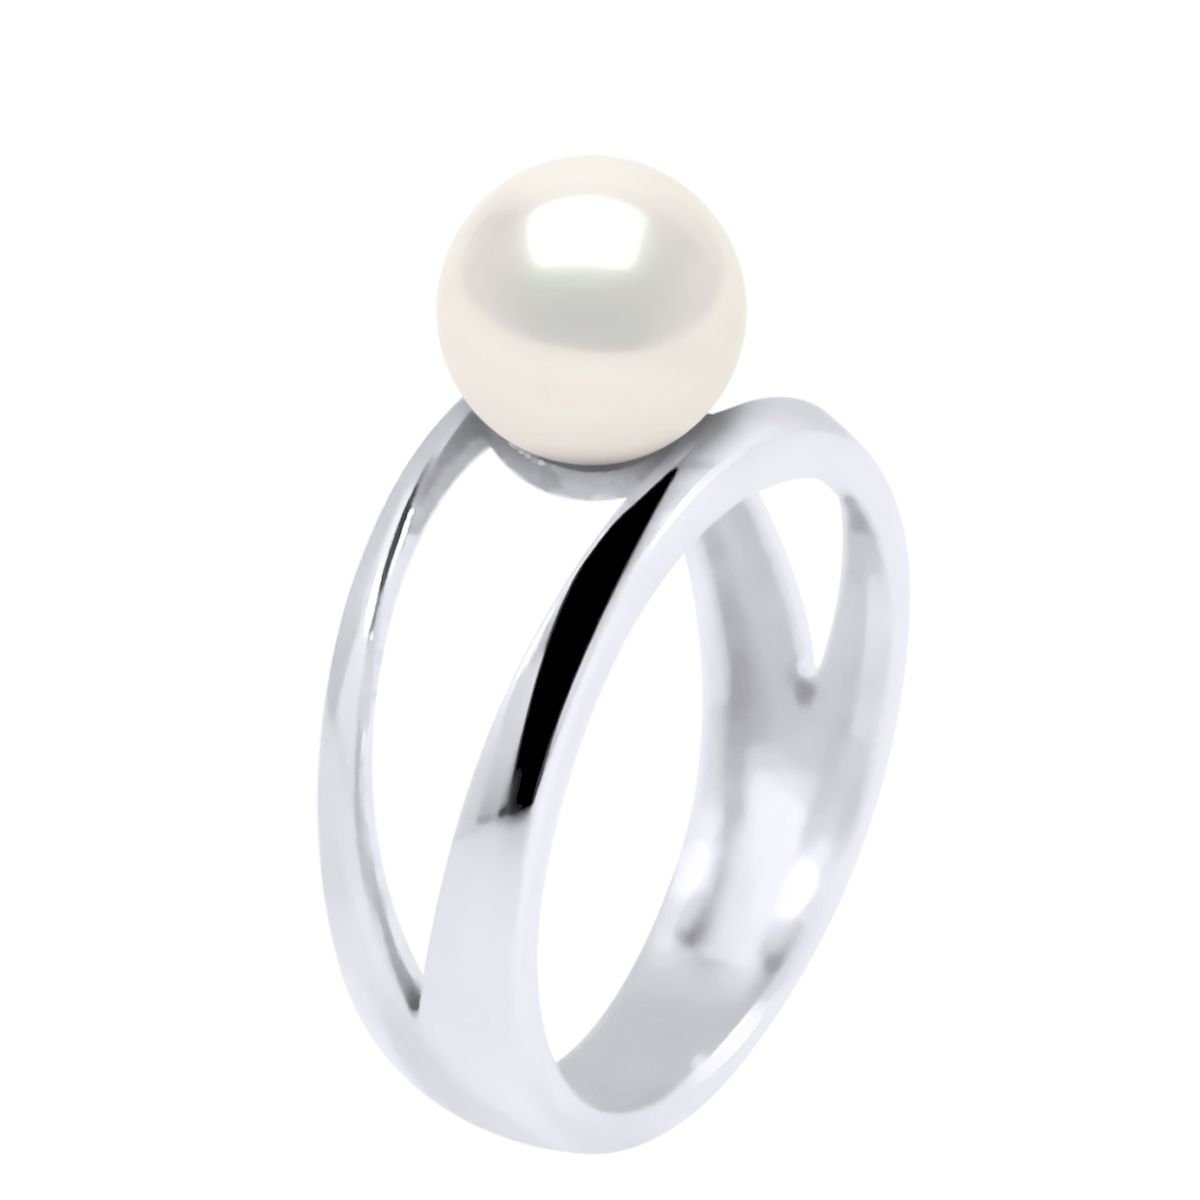 Ring White Gold 375 true Perle de Culture d'Eau Douce 7-8 mm - 0,31 in - Natural White Color Size avalaible from 48 to 62 , J to U - Our jewellery is made in France and will be delivered in a gift box accompanied by a Certificate of Authenticity and International Warranty